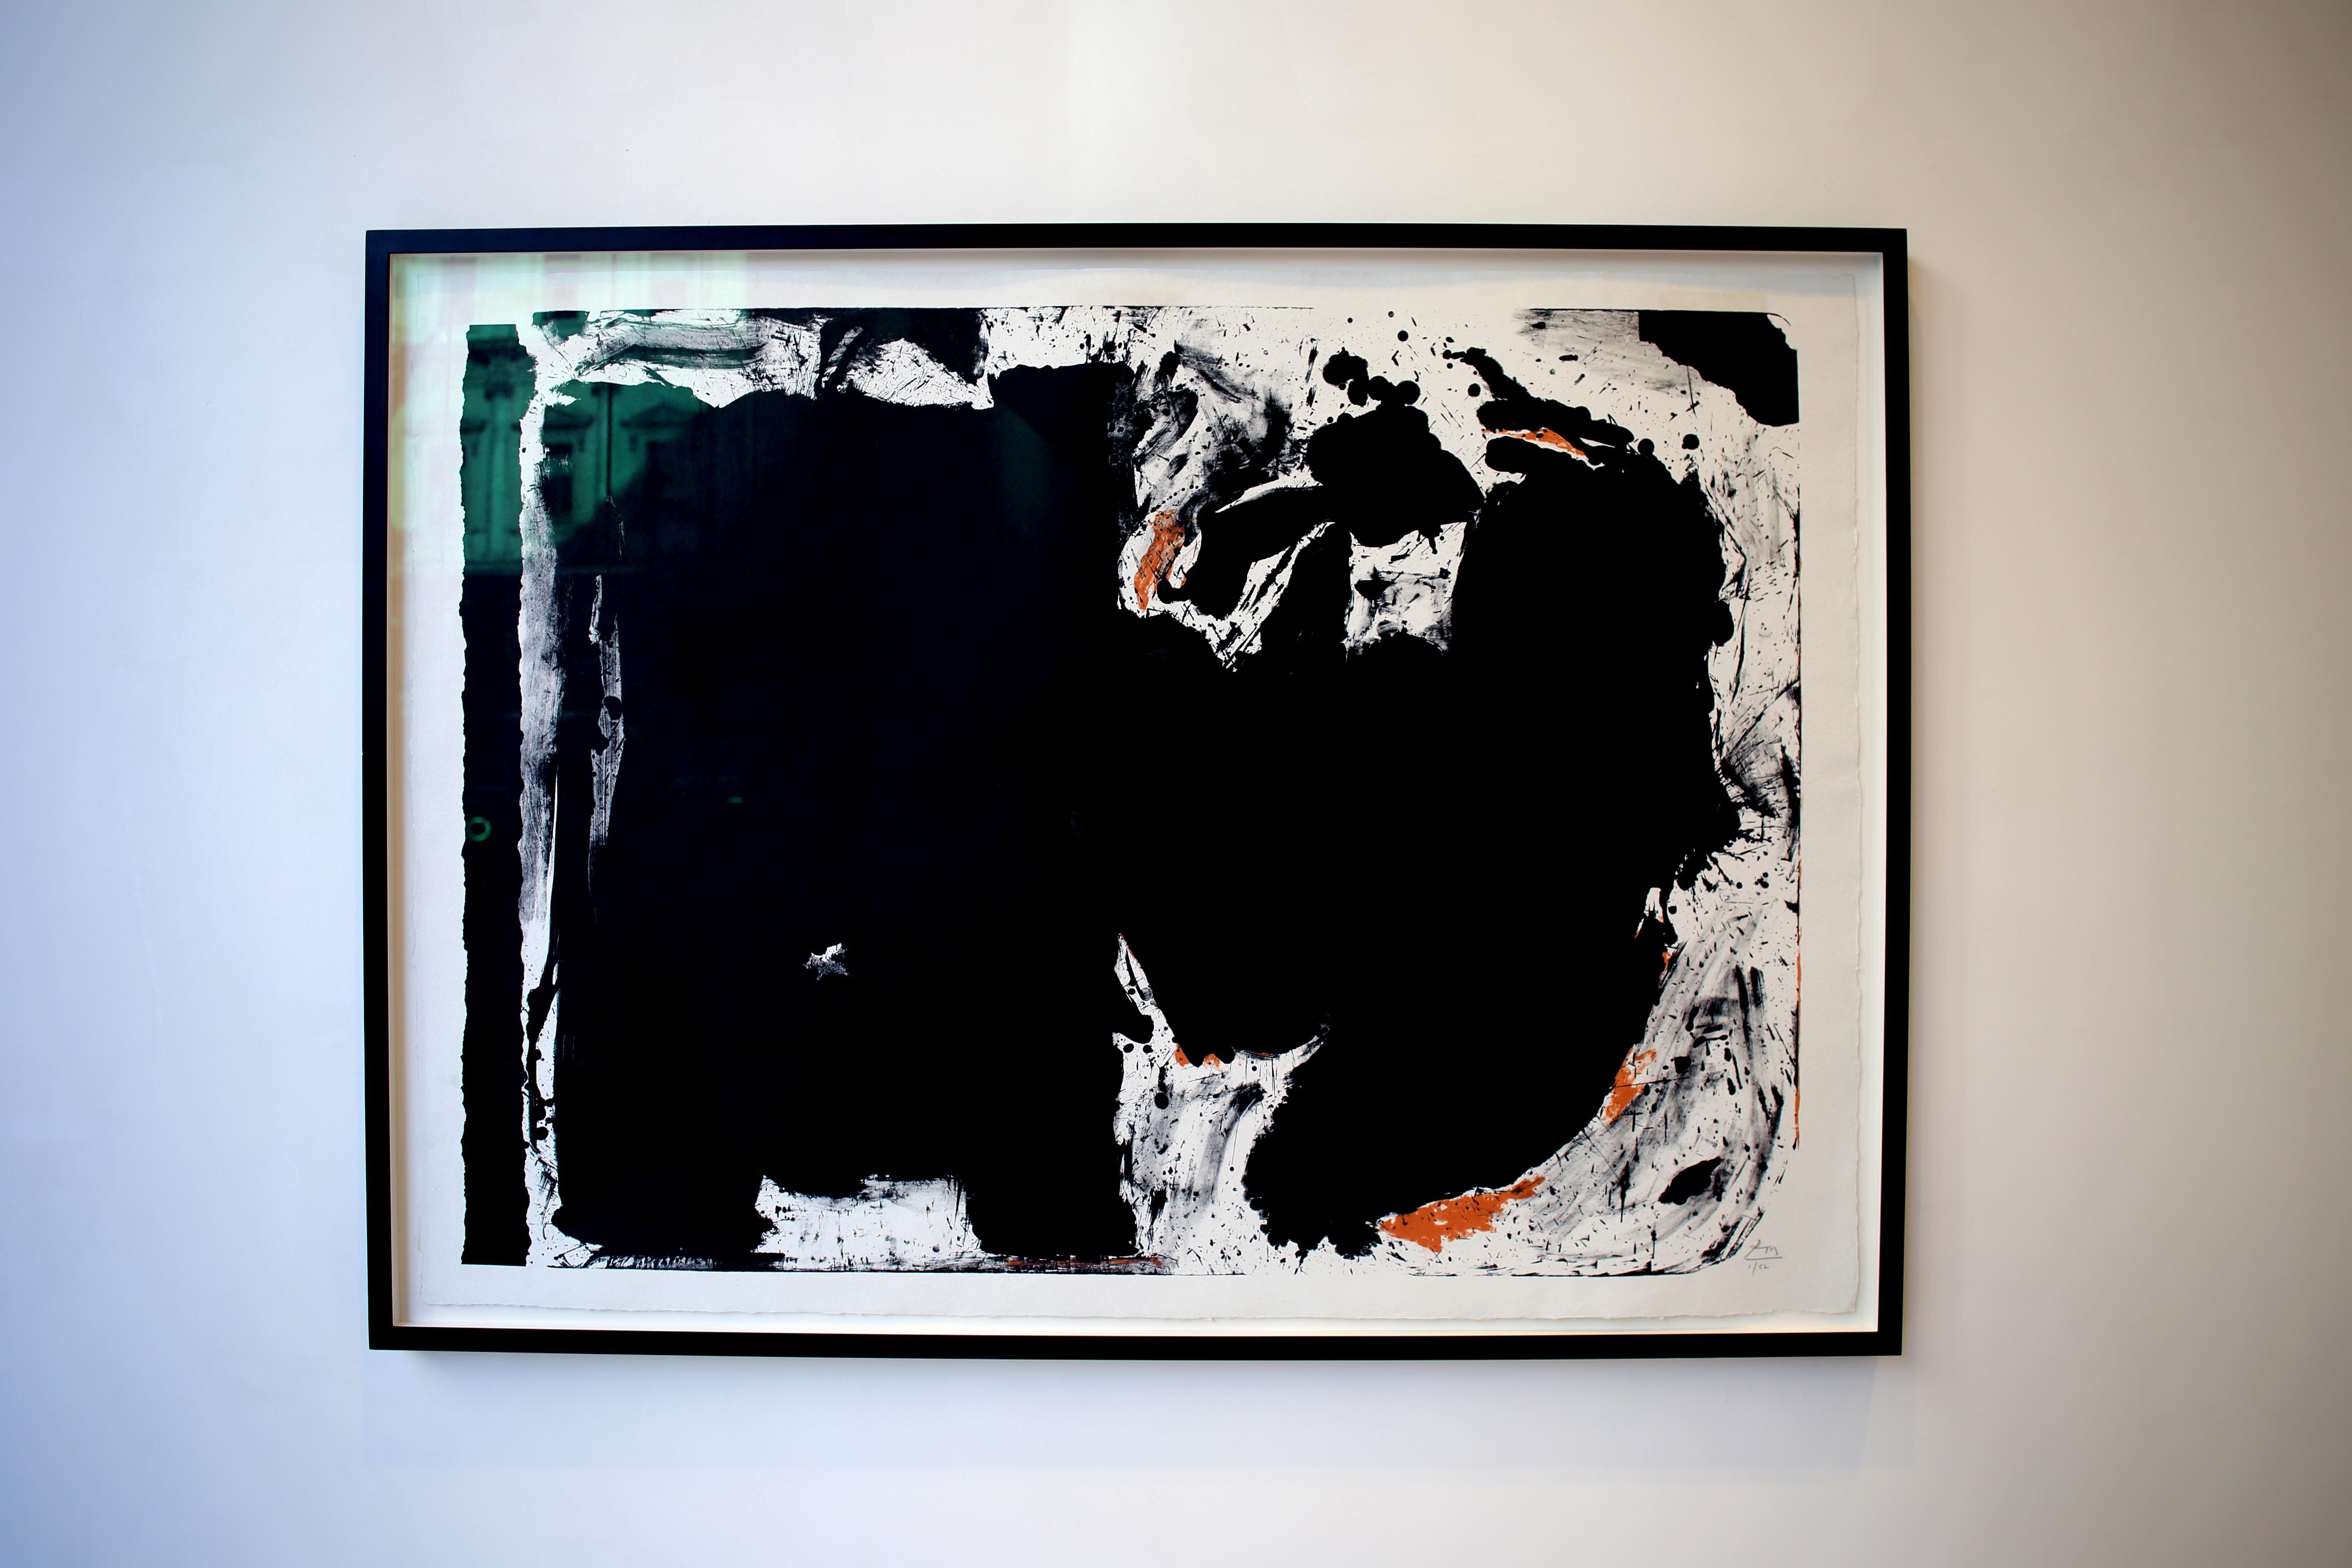 Lament for Lorca - Print by Robert Motherwell